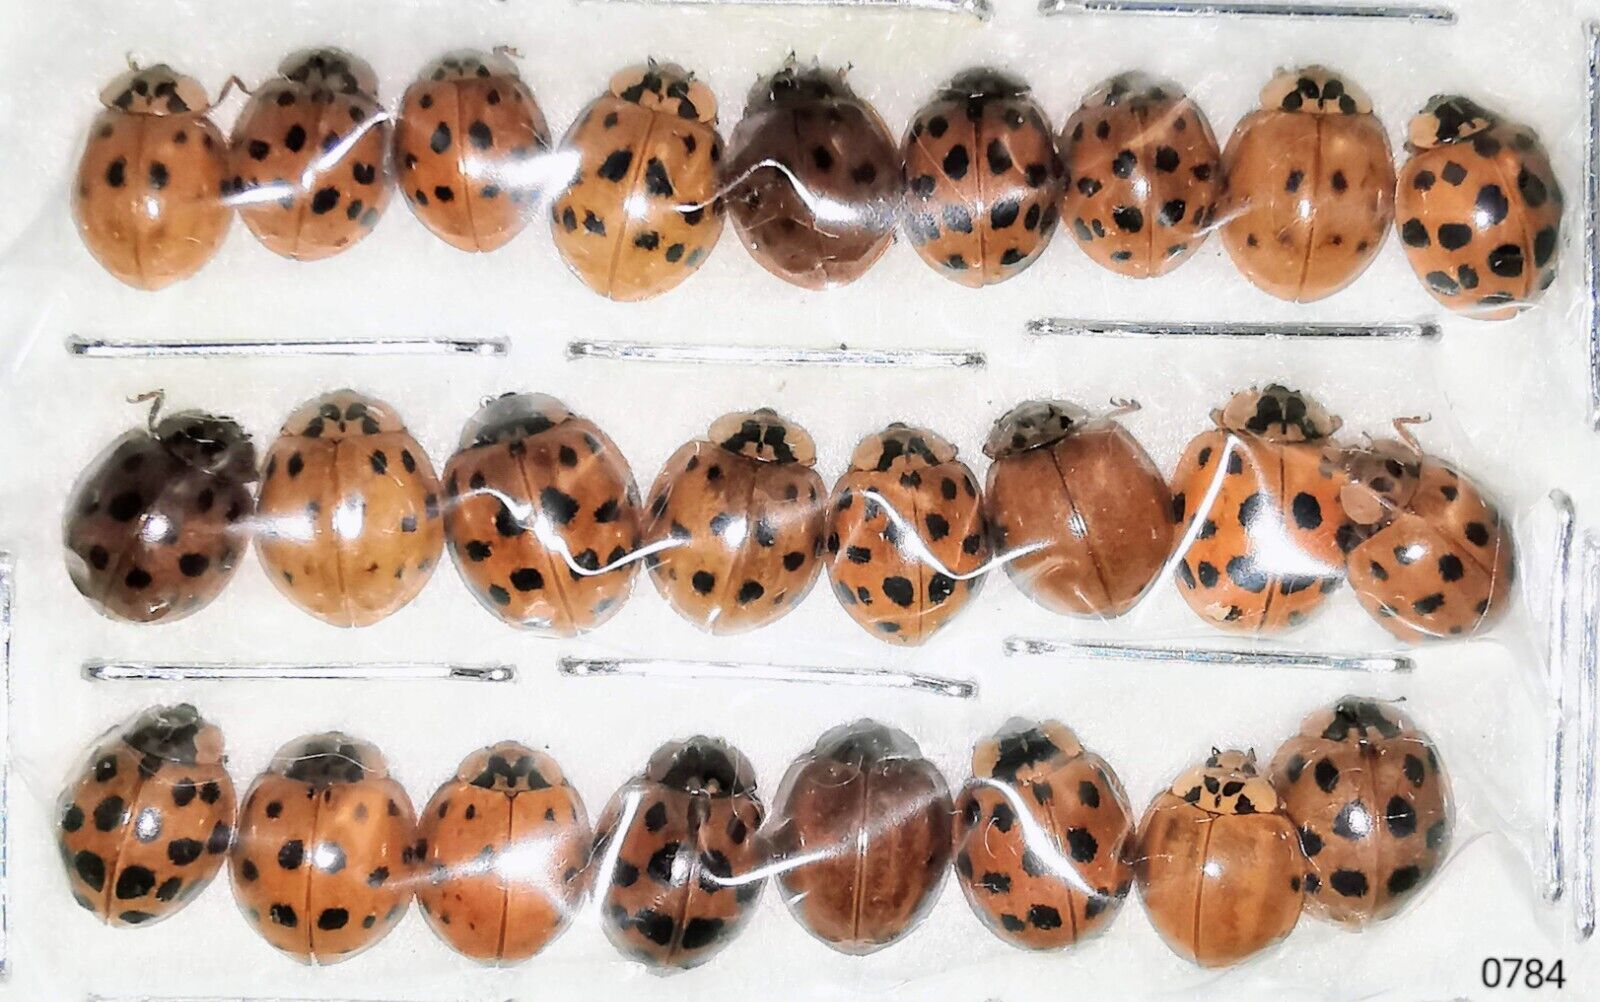 Coccinellidae Harmonia axyridis A1 or A- from CANADA - Pack 25 pcs - #0784